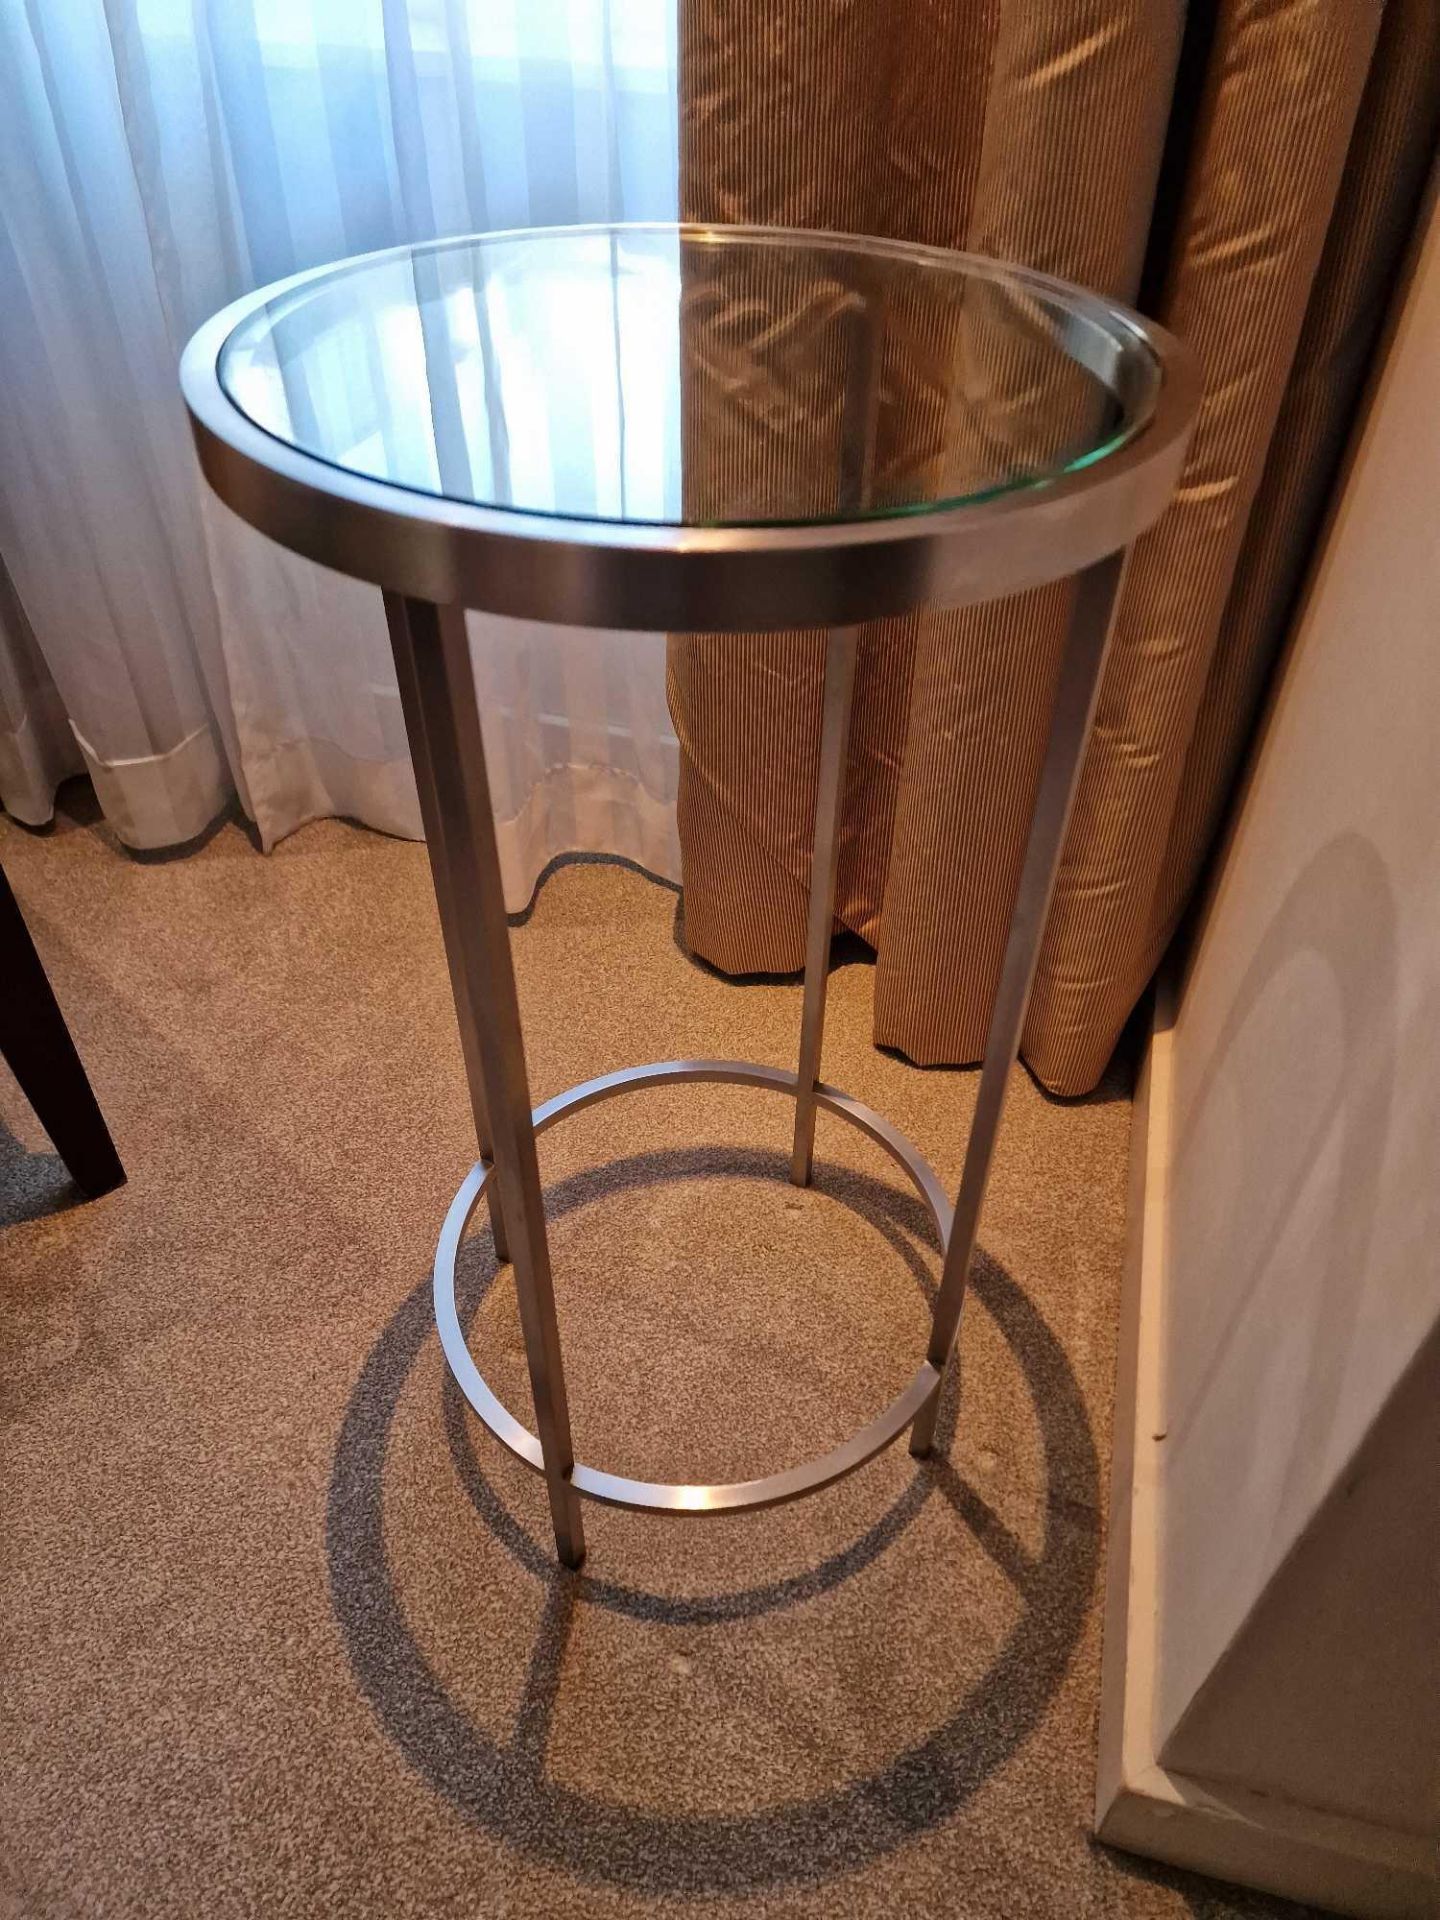 A Modern Design Stainless Steel And Tempered Glass Side Table 35cm Diameter x 64cm Tall